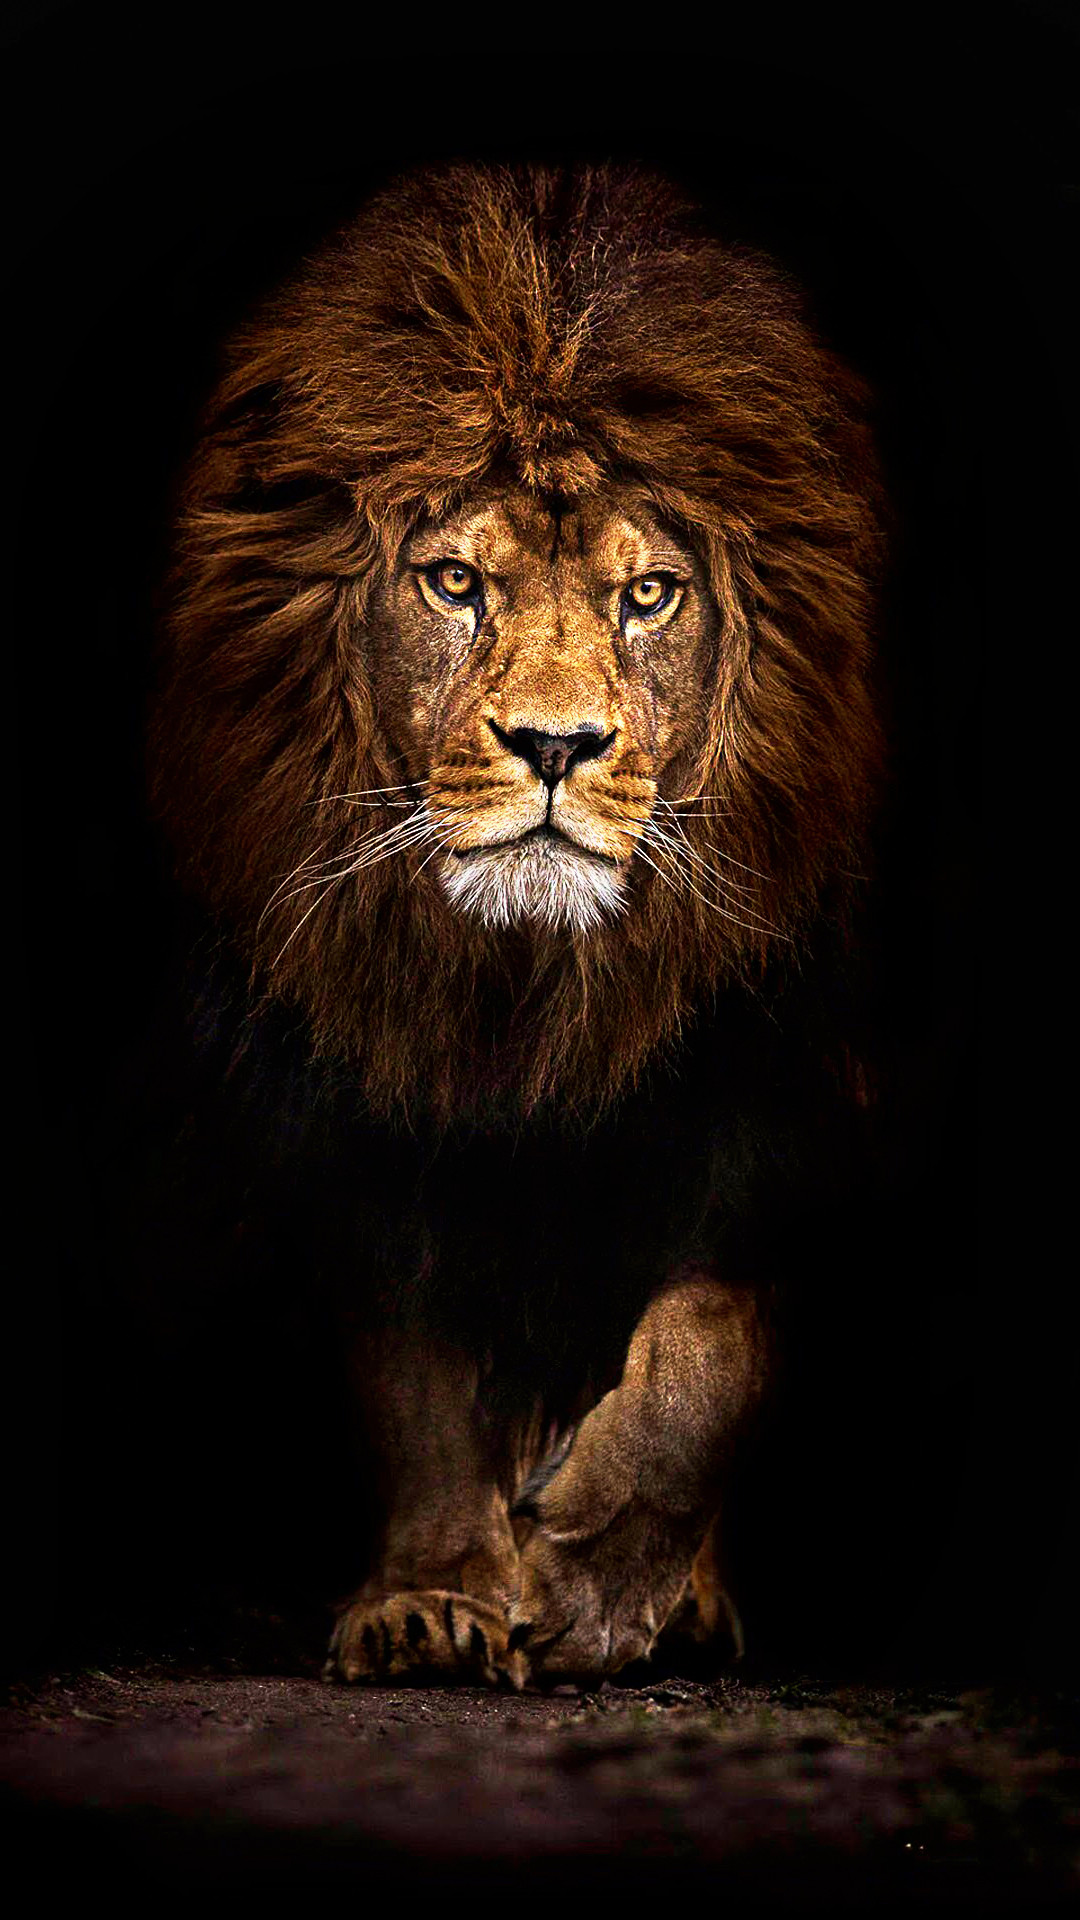 1080x1920 Cool lion wallpapers for iphone - photo#9